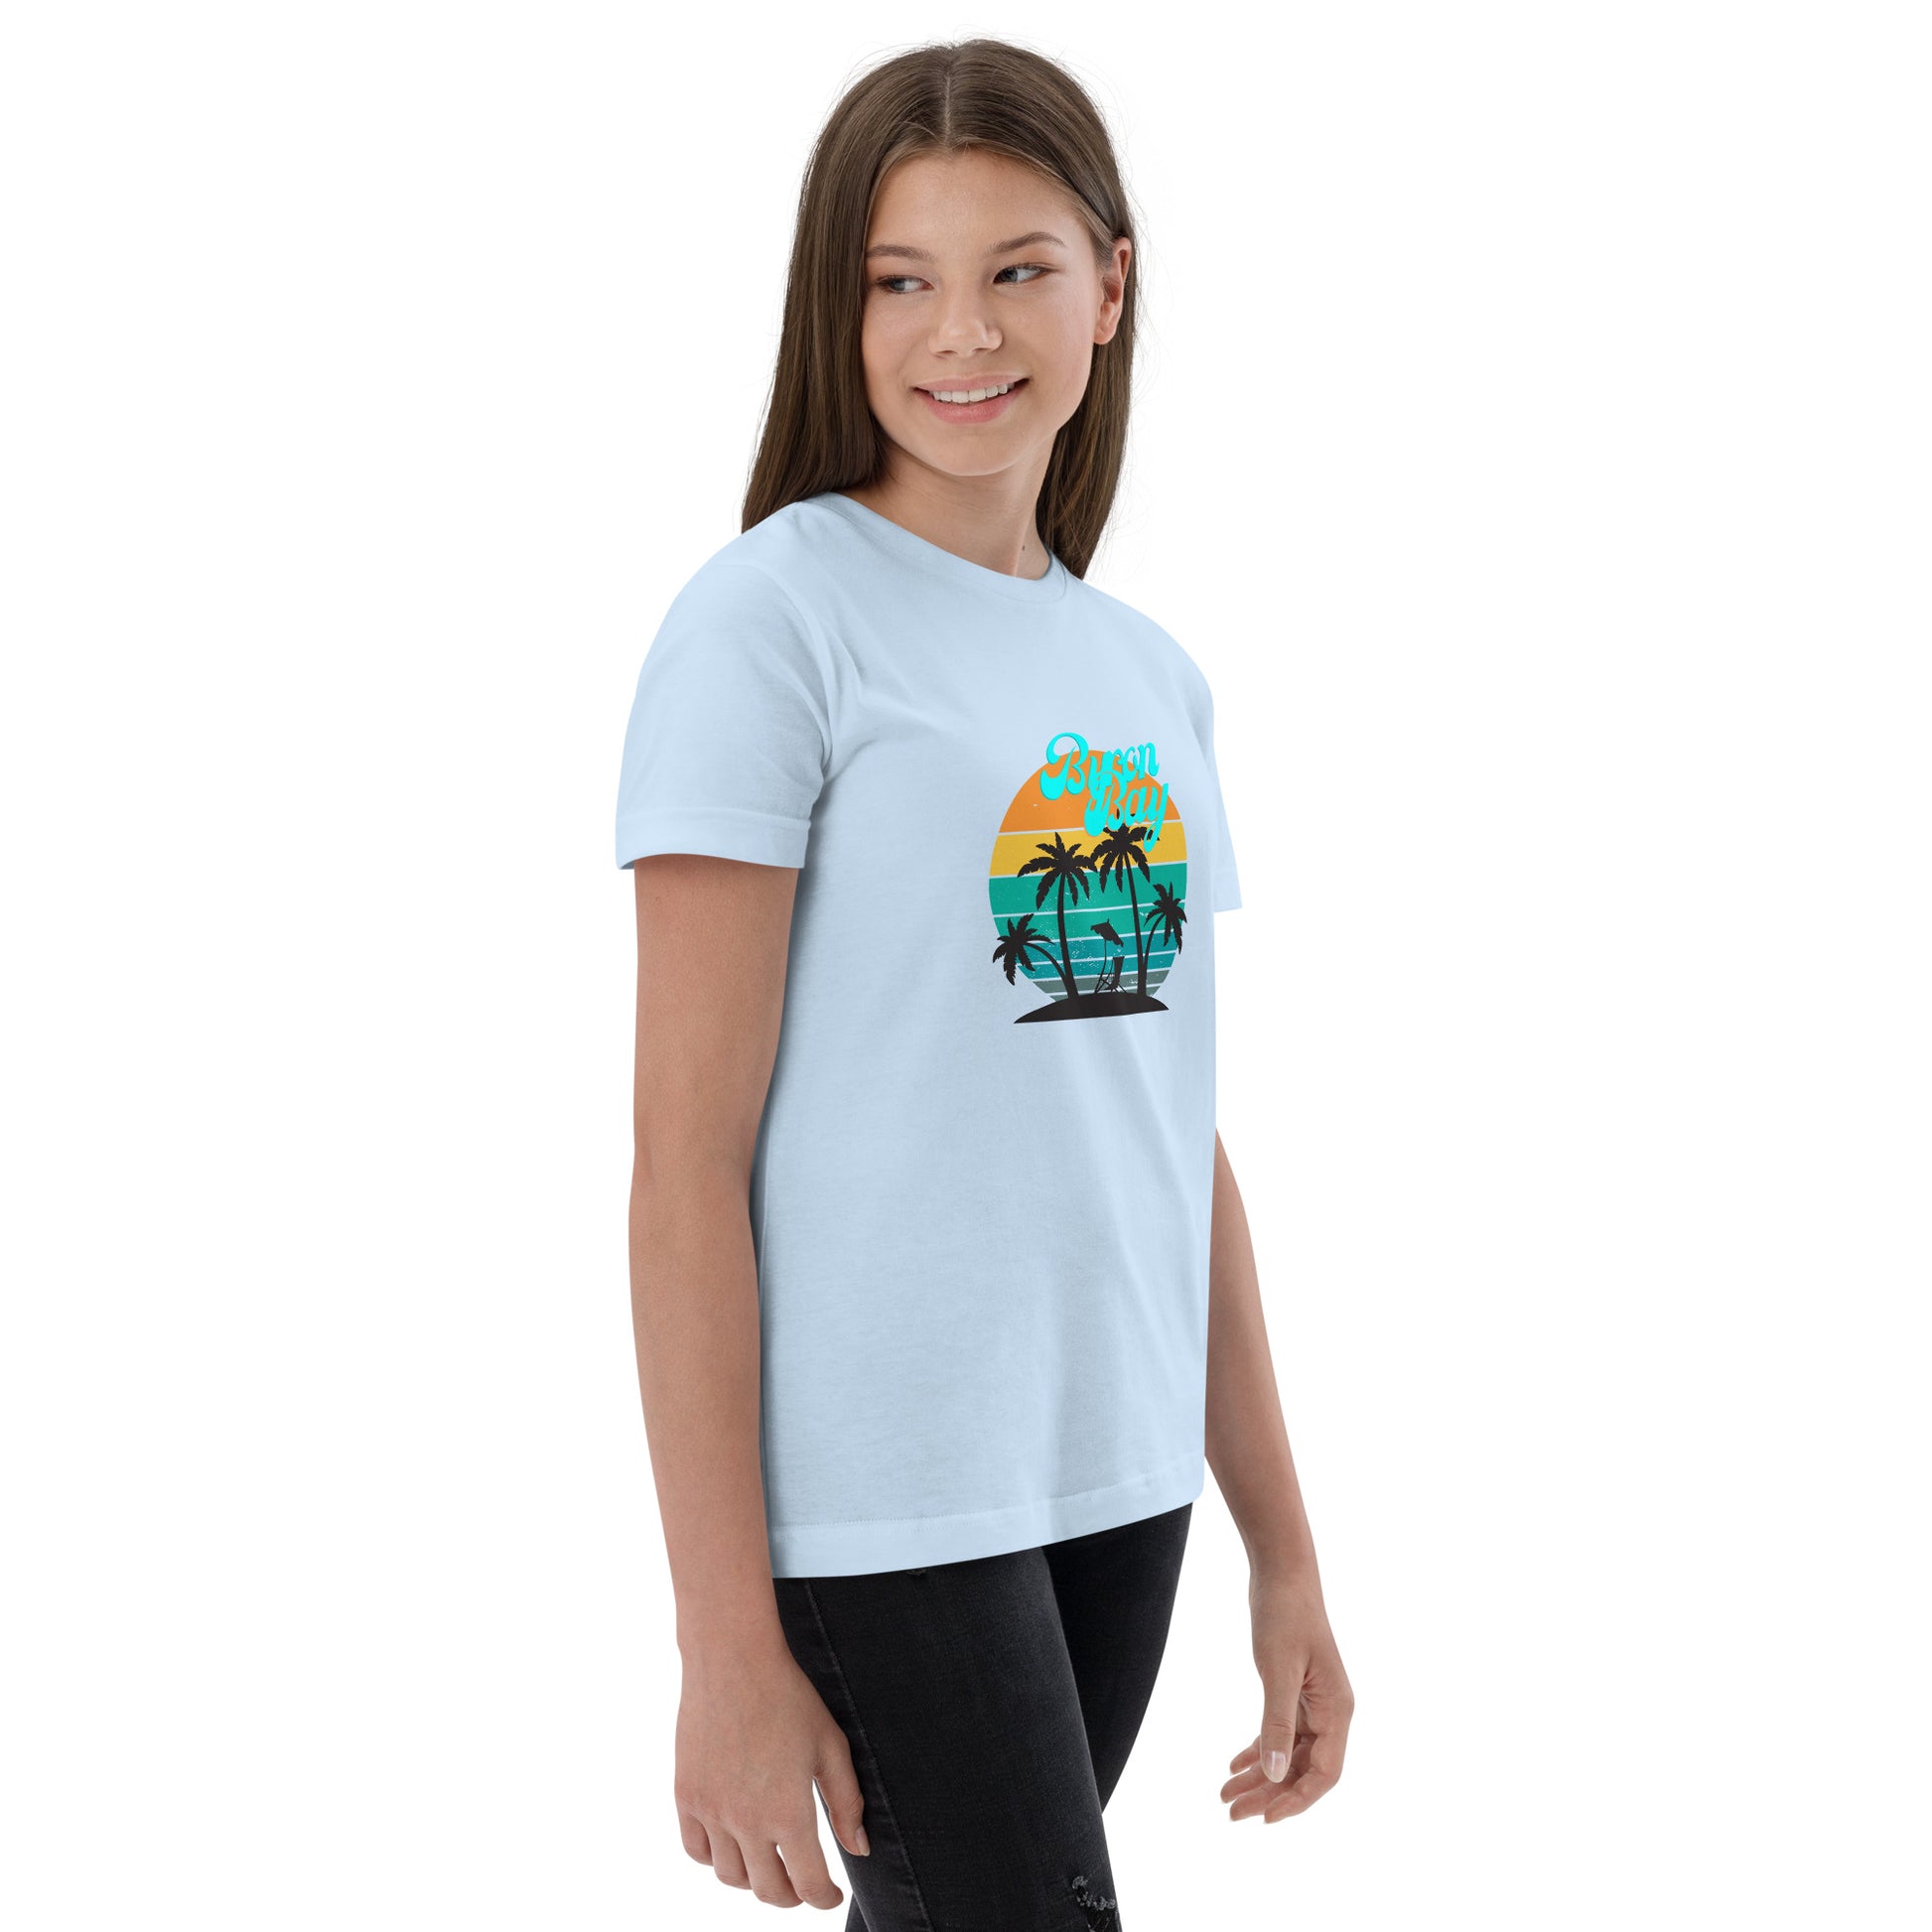  Kids T-Shirt - Light Blue - side view, being warn on a girl standing with her arms by her side - Byron Bay design on front - Genuine Byron Bay Merchandise | Produced by Go Sea Kayak Byron Bay 